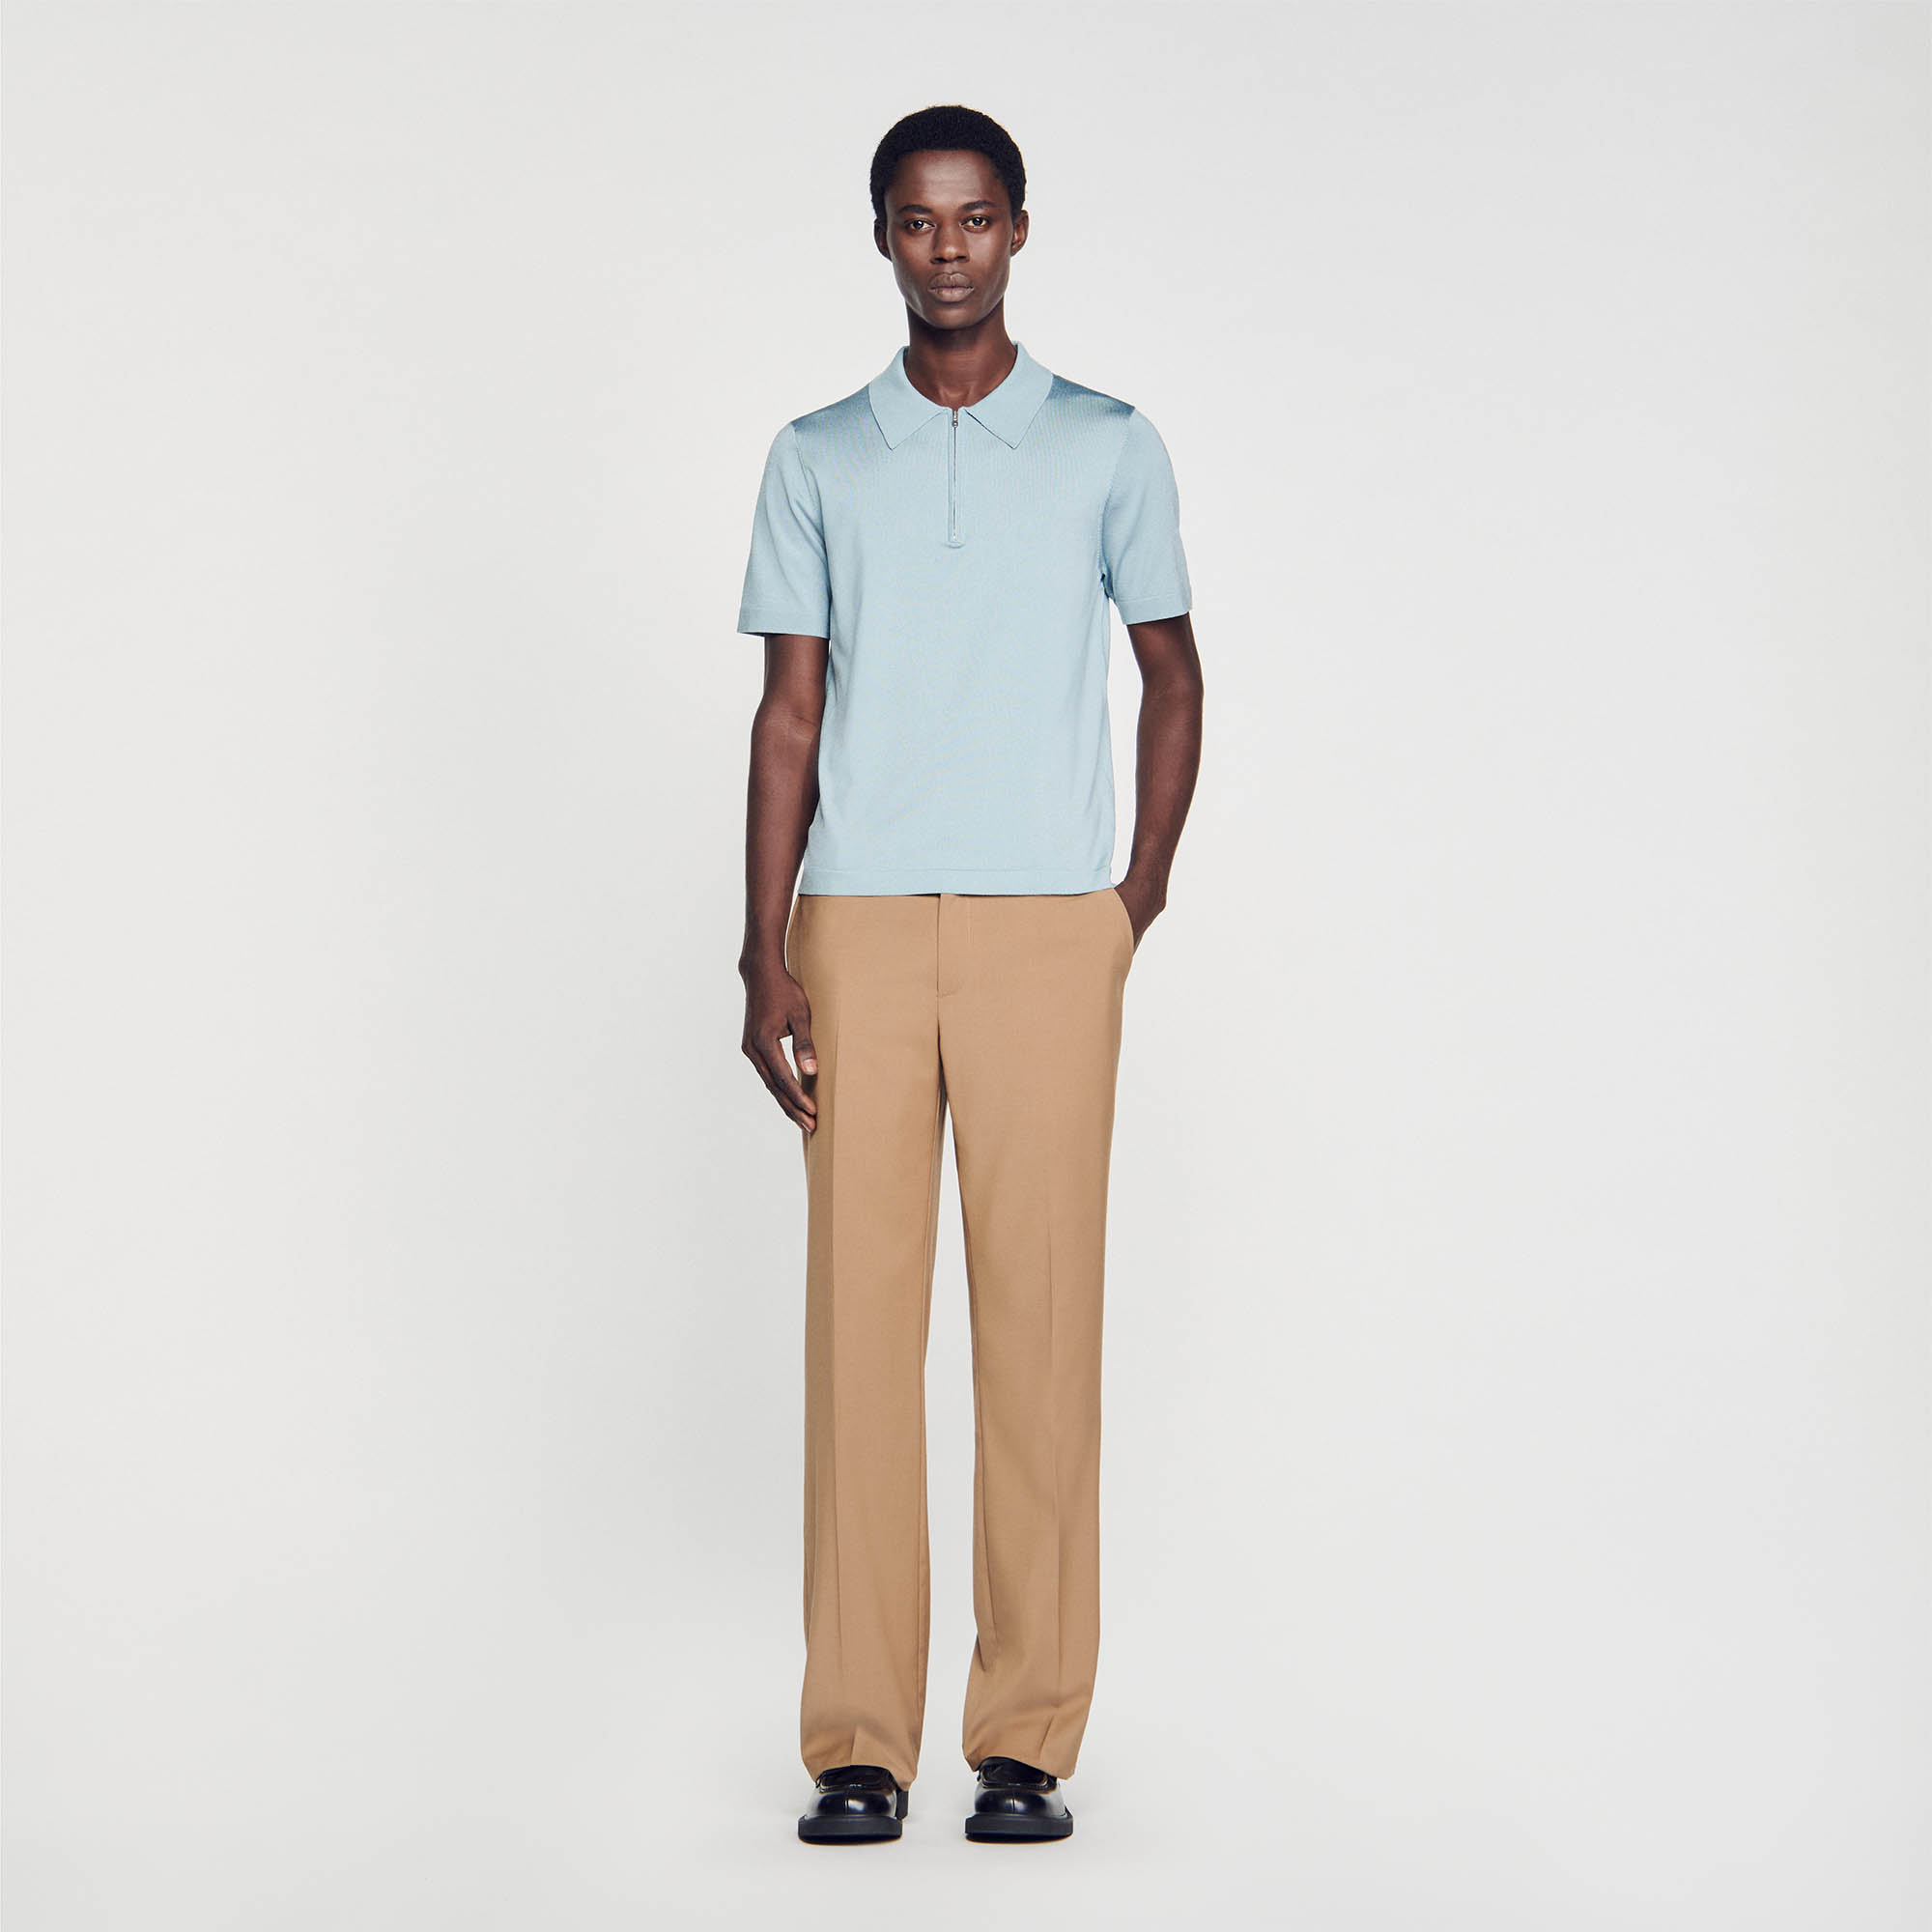 Sandro acetate Knitted polo shirt with zip collar